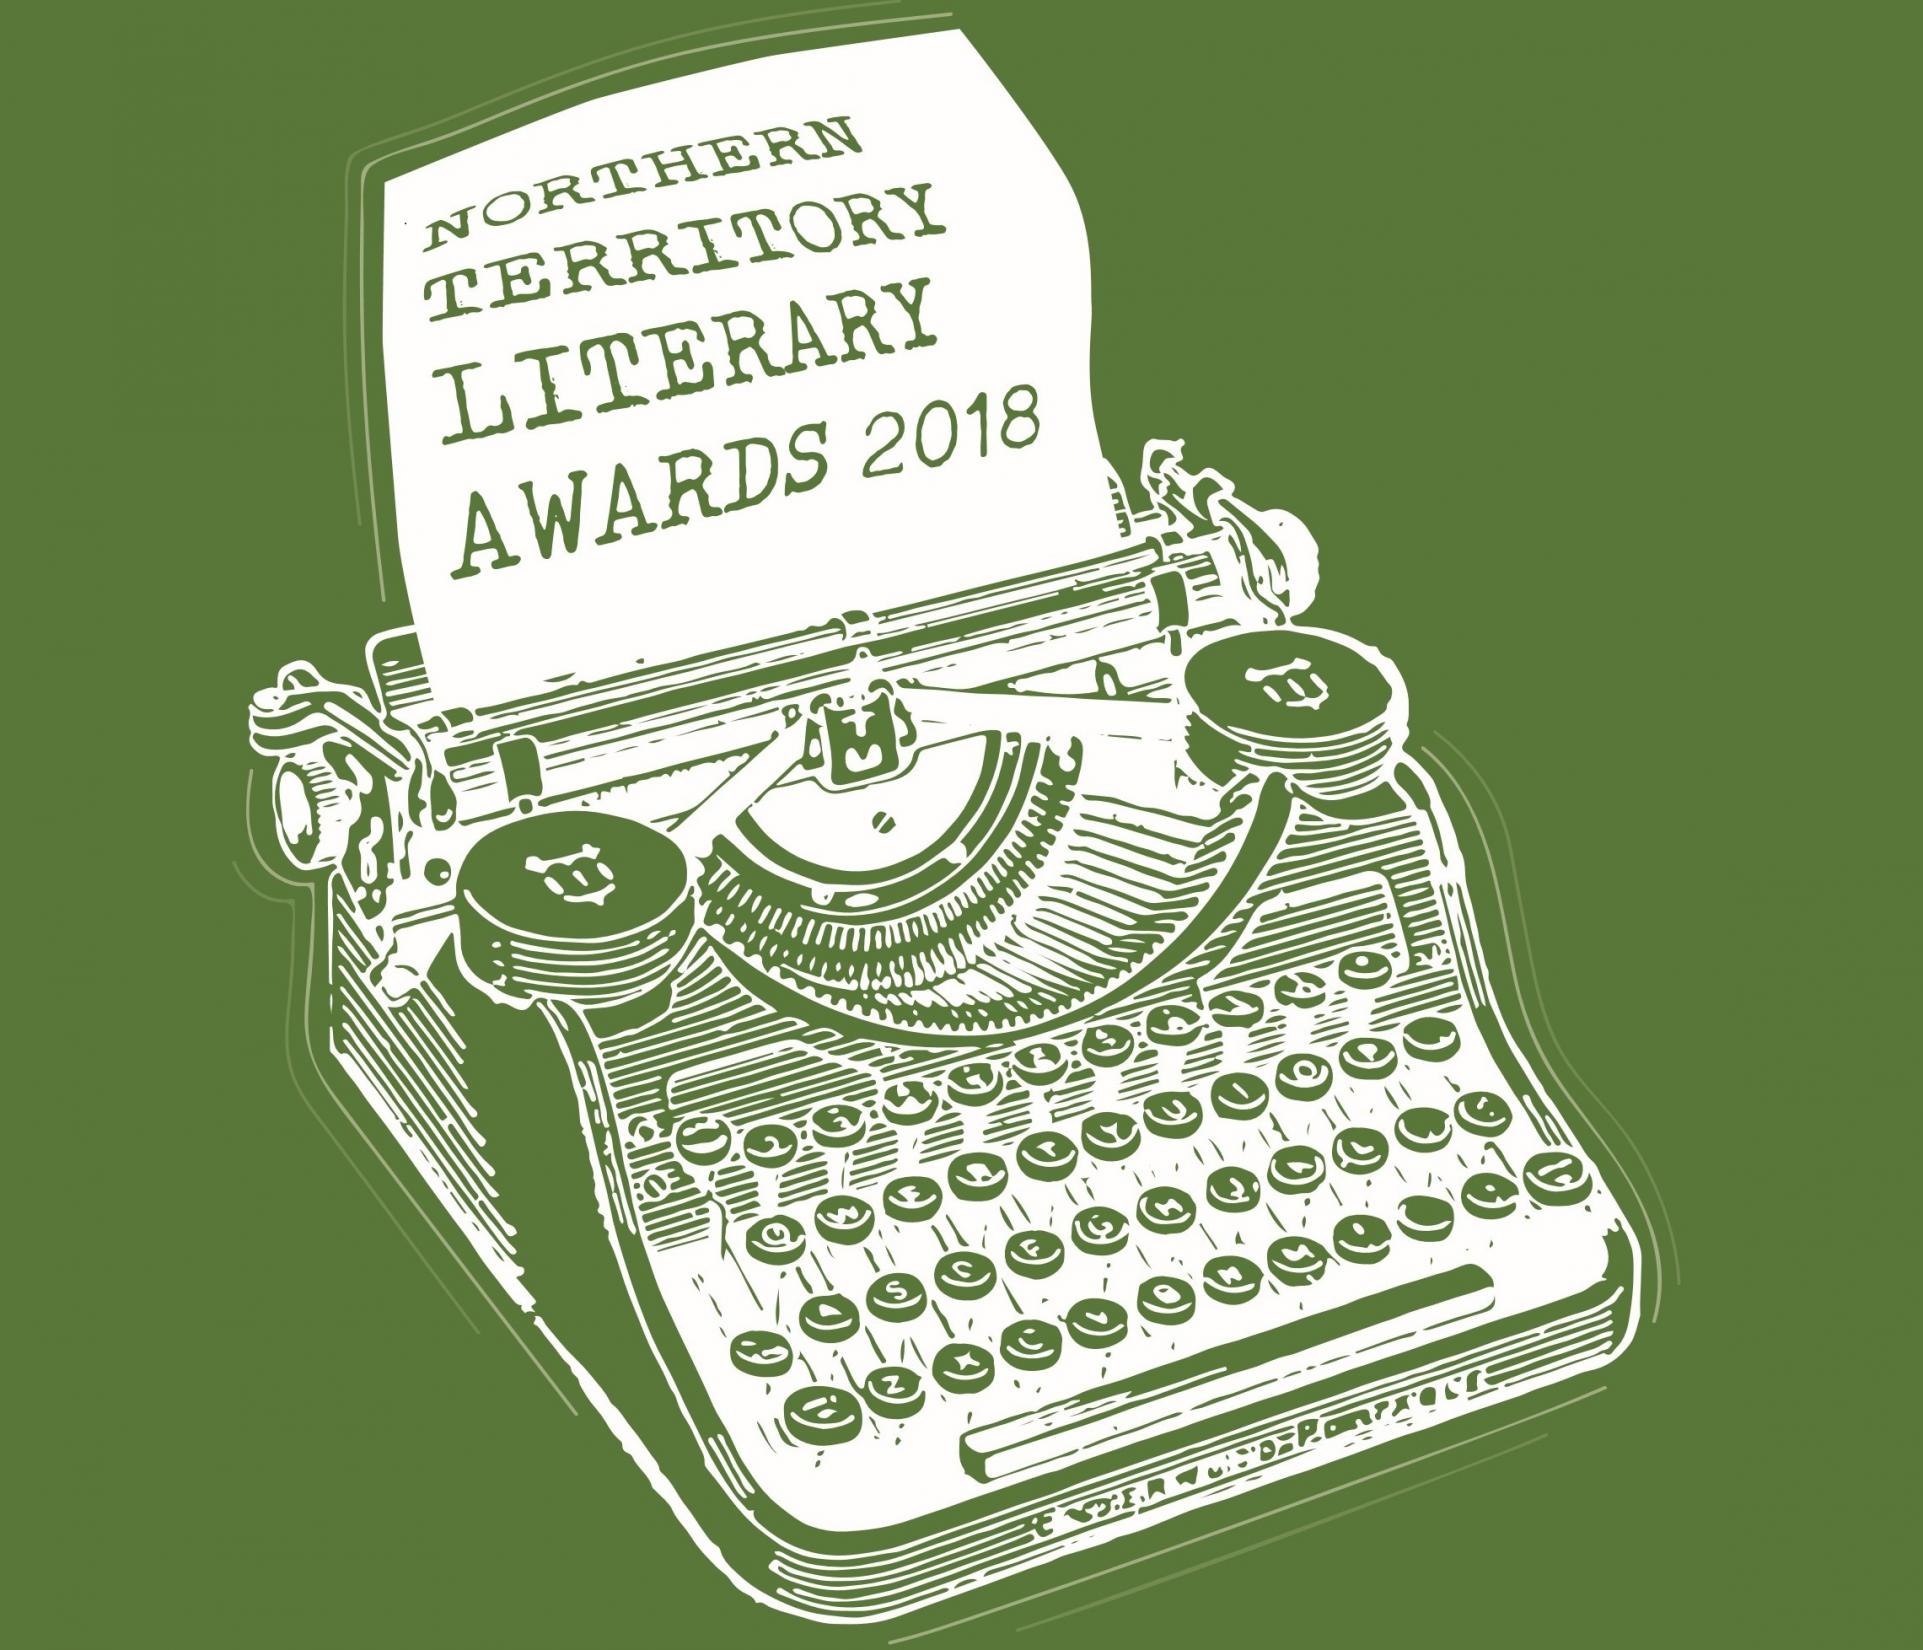 Northern Territory Literary Awards ceremony icon - typewriter with paper out the top typing out the Award name